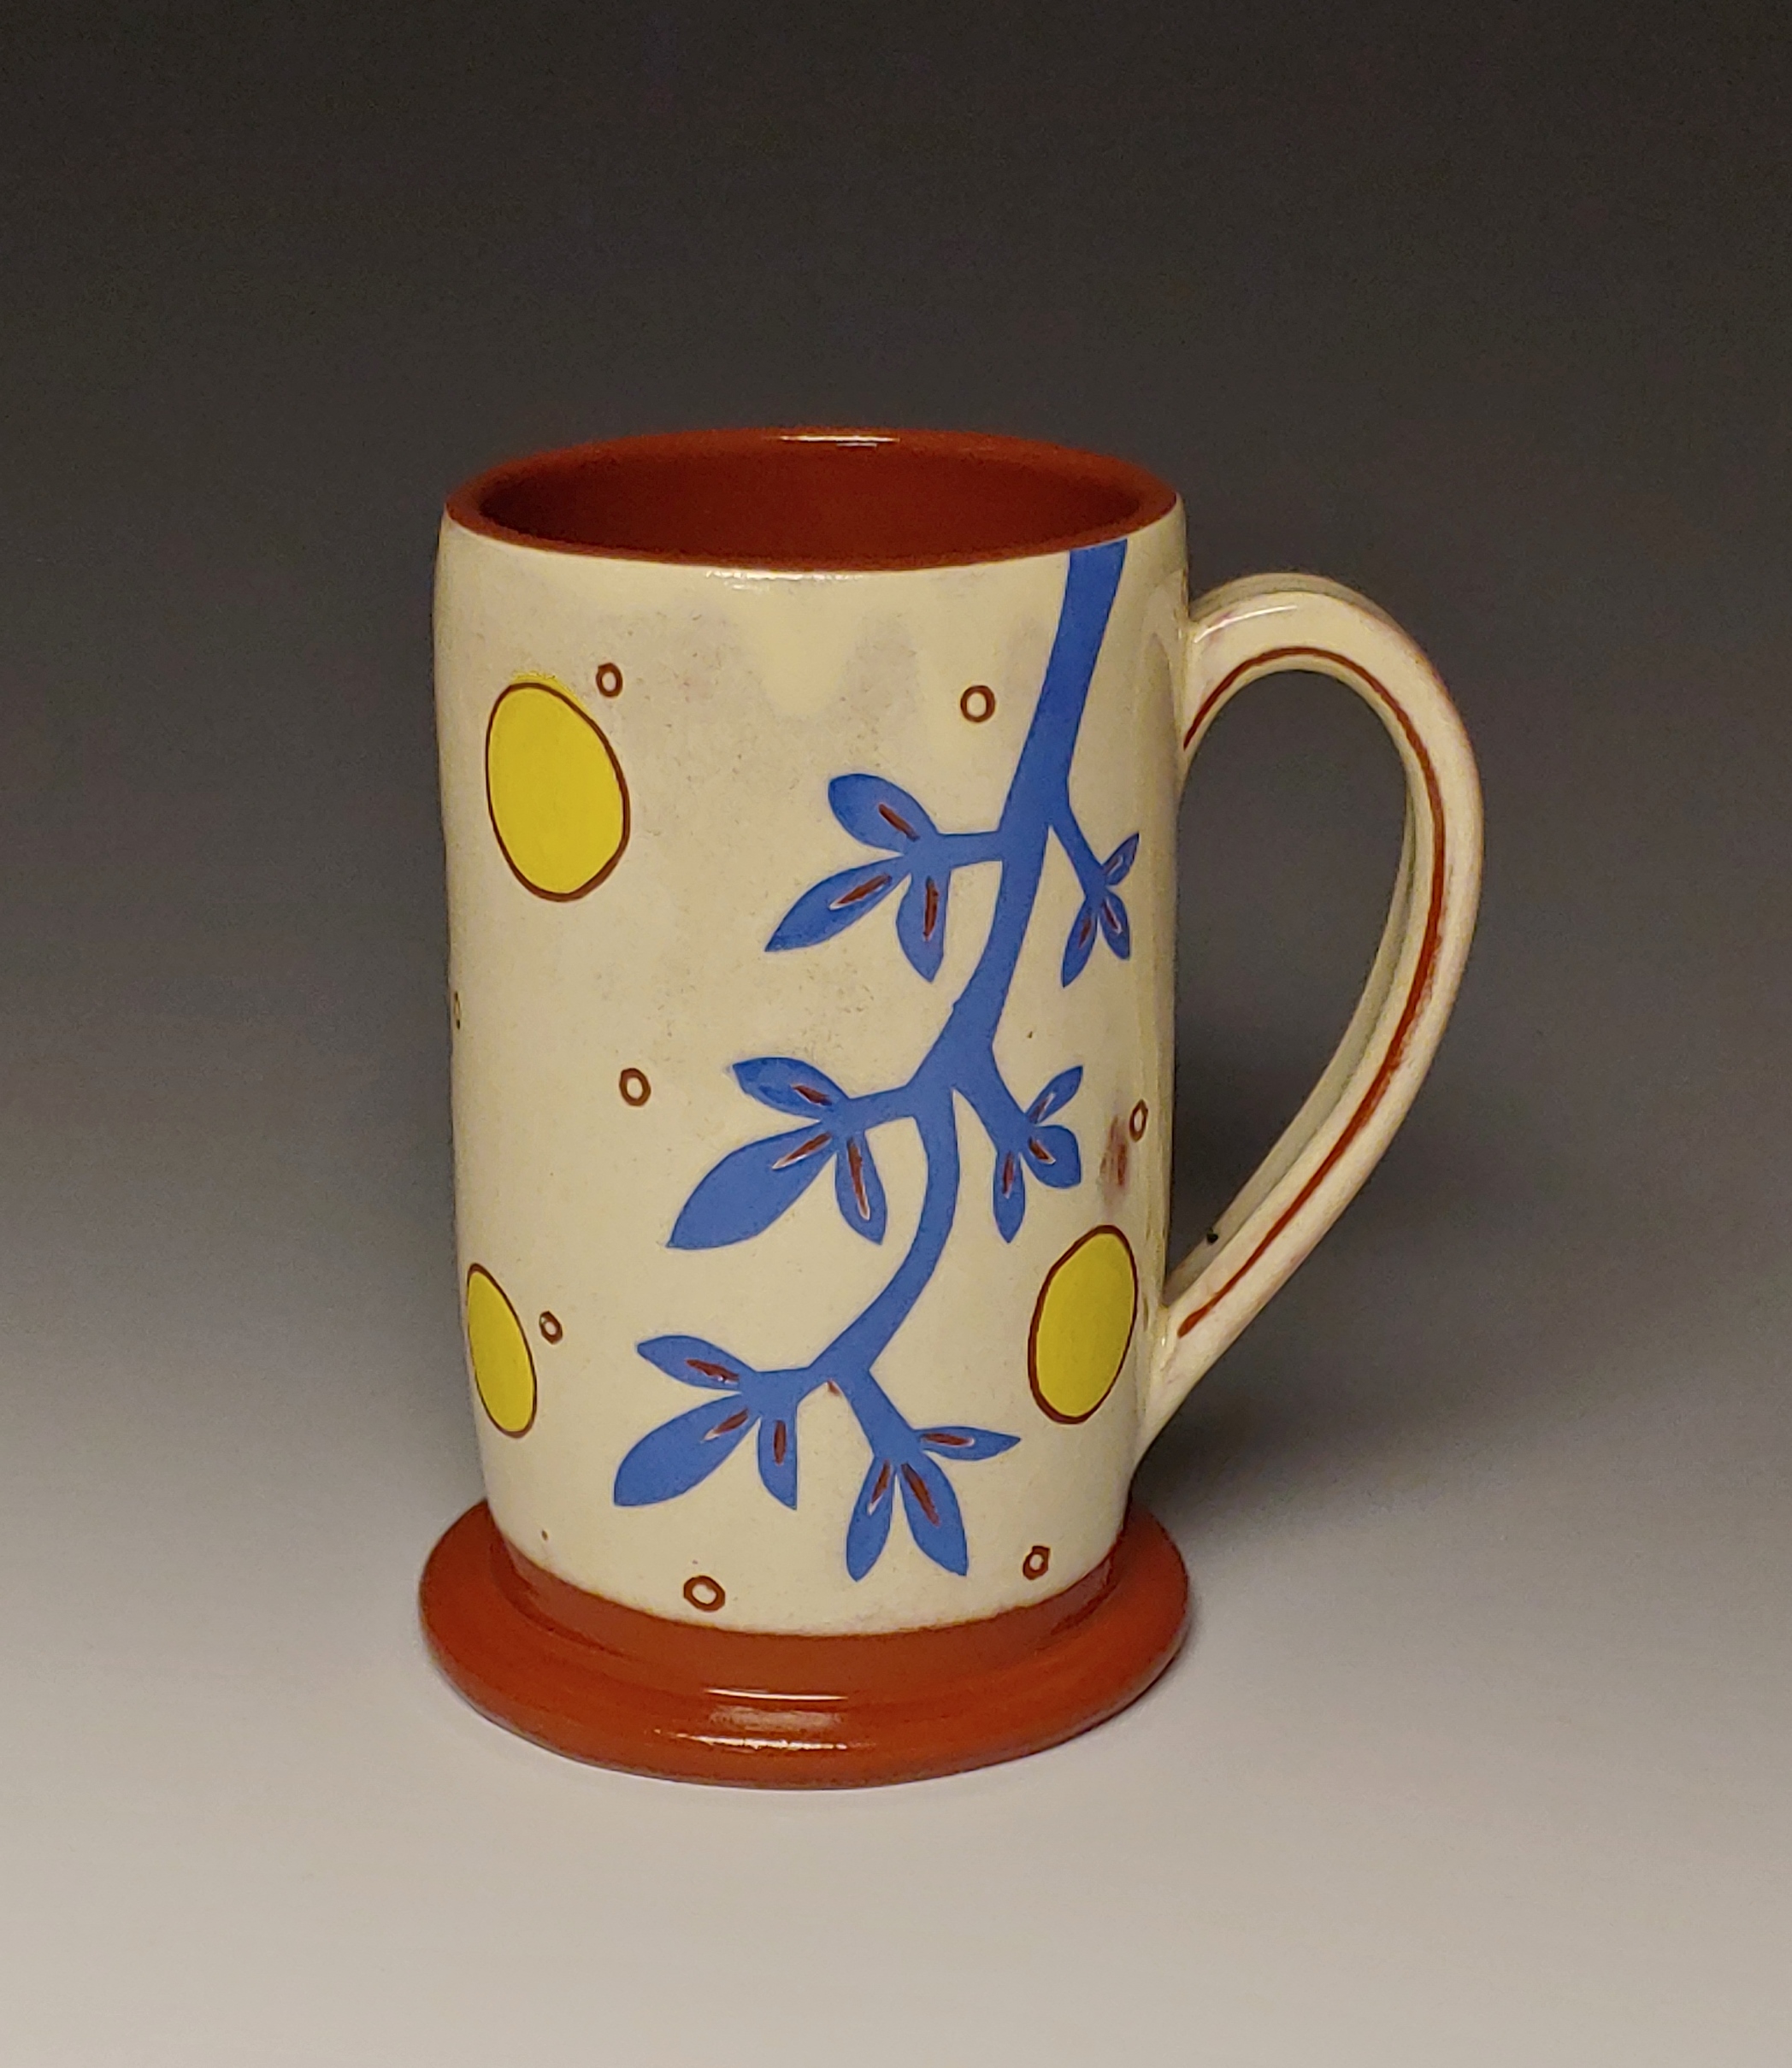 Cheerful Mug with Blue Branch and Yellow Spots